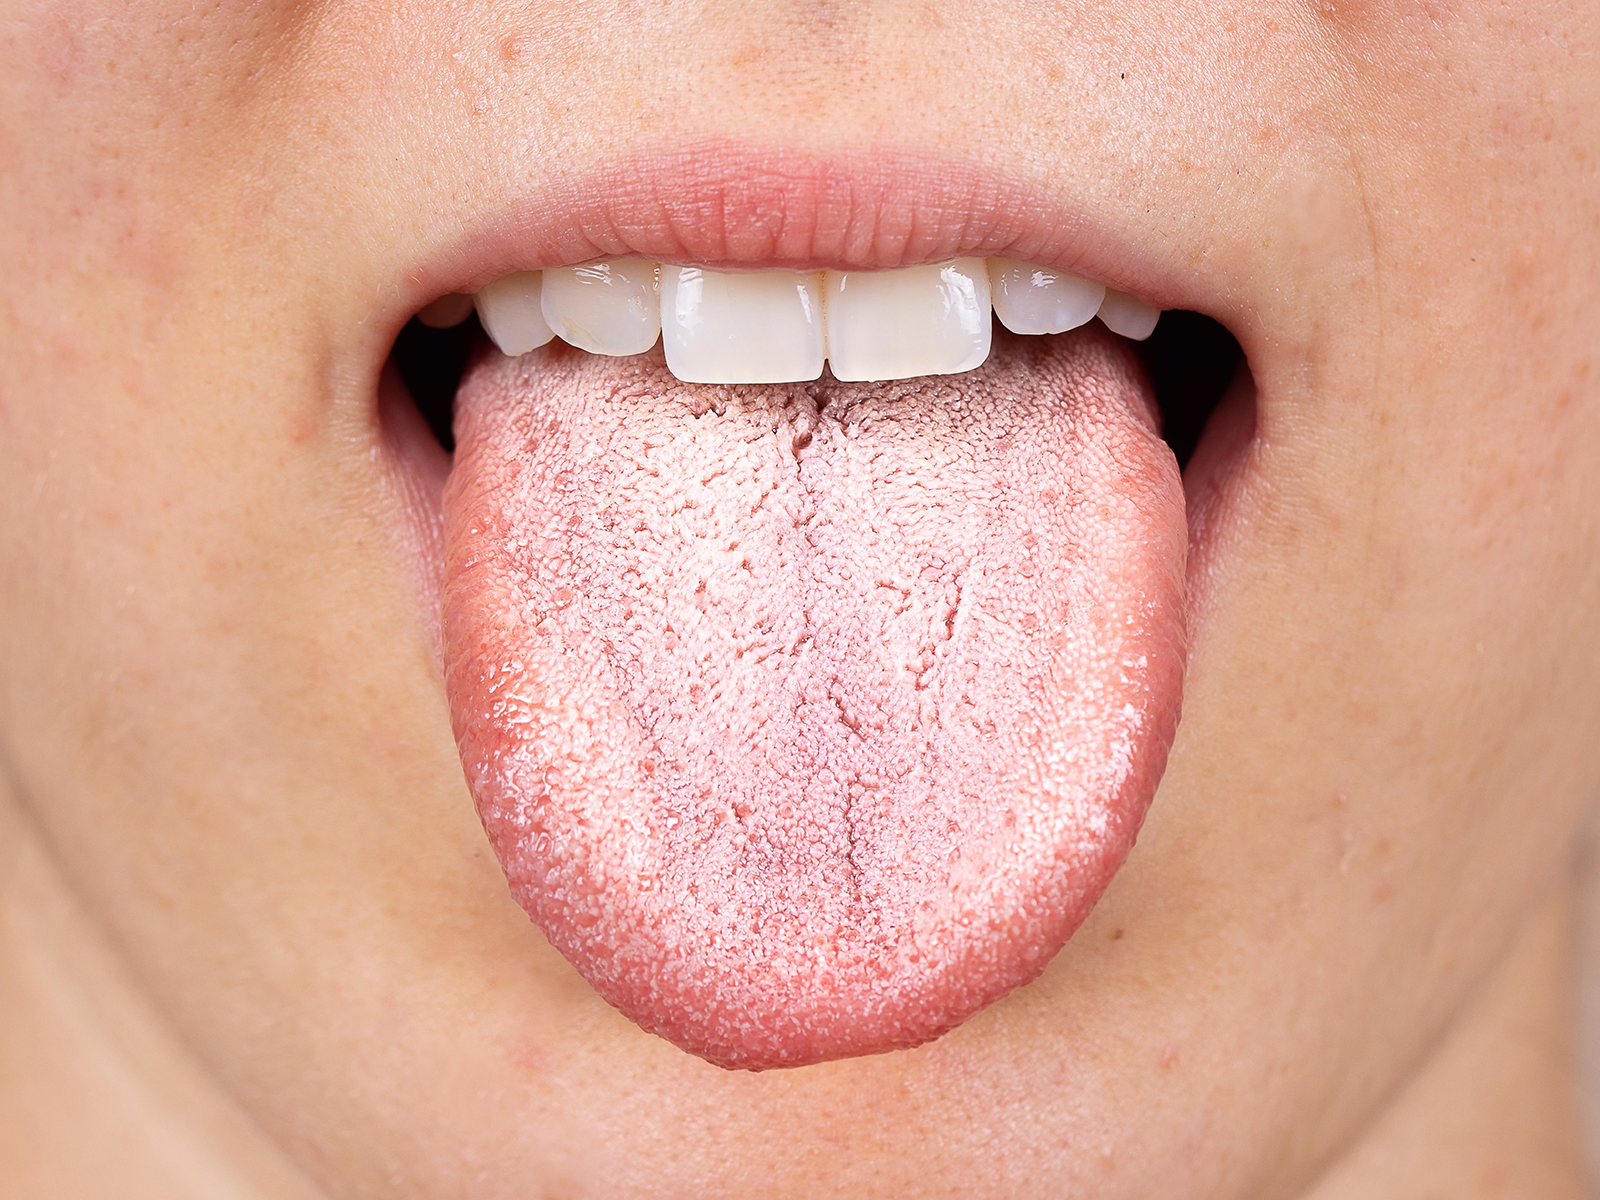 What is oral thrush and what are its causes?